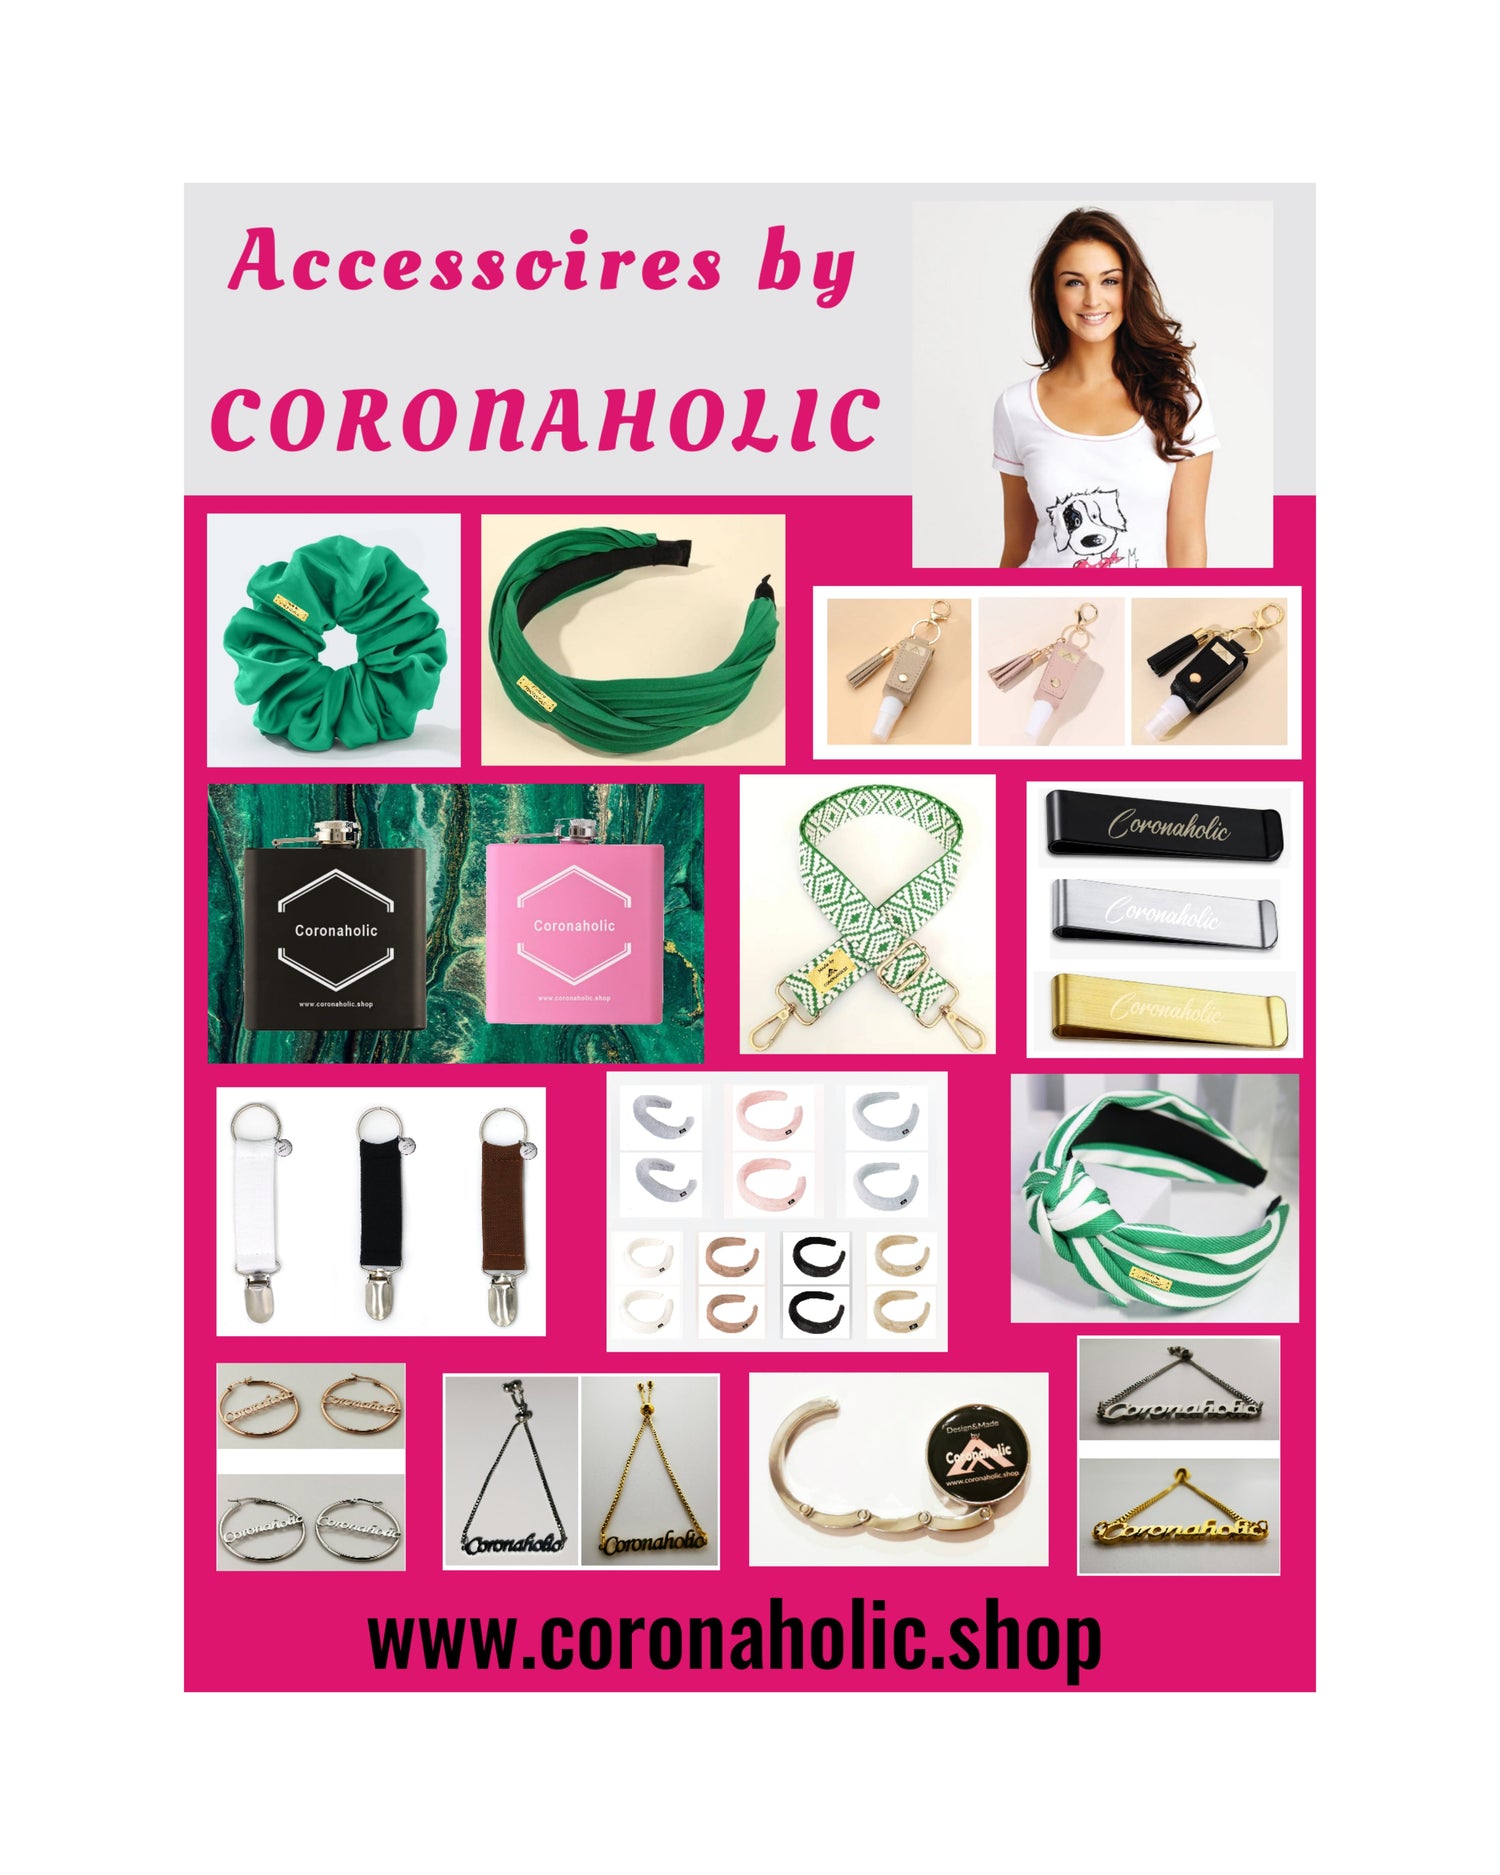 "Accessories" made by Coronaholic Design&Label